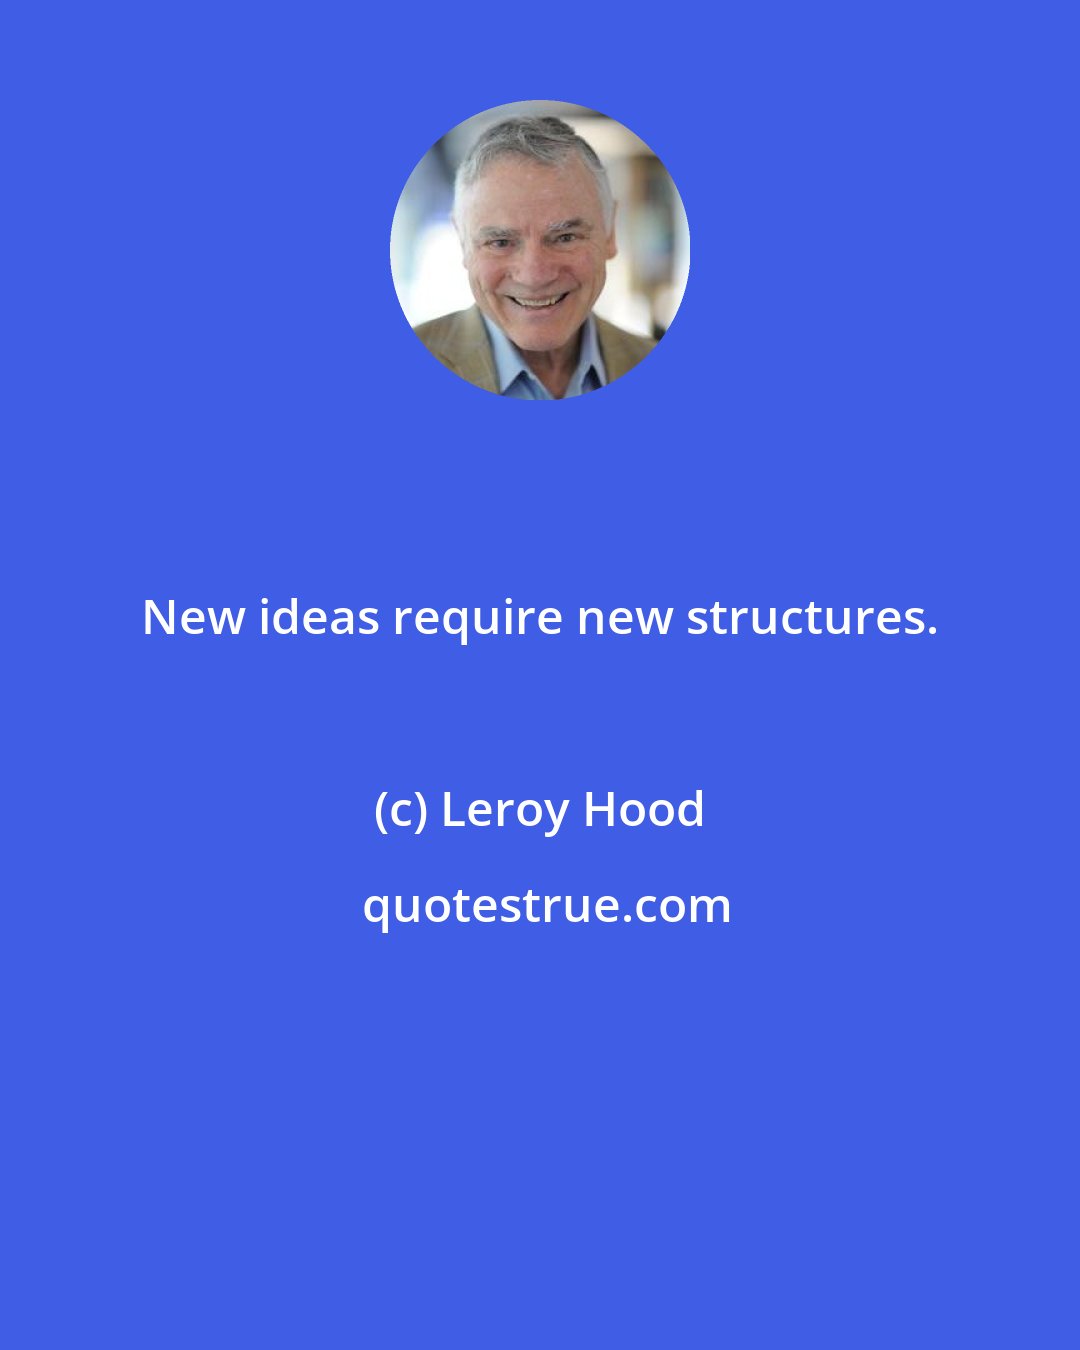 Leroy Hood: New ideas require new structures.